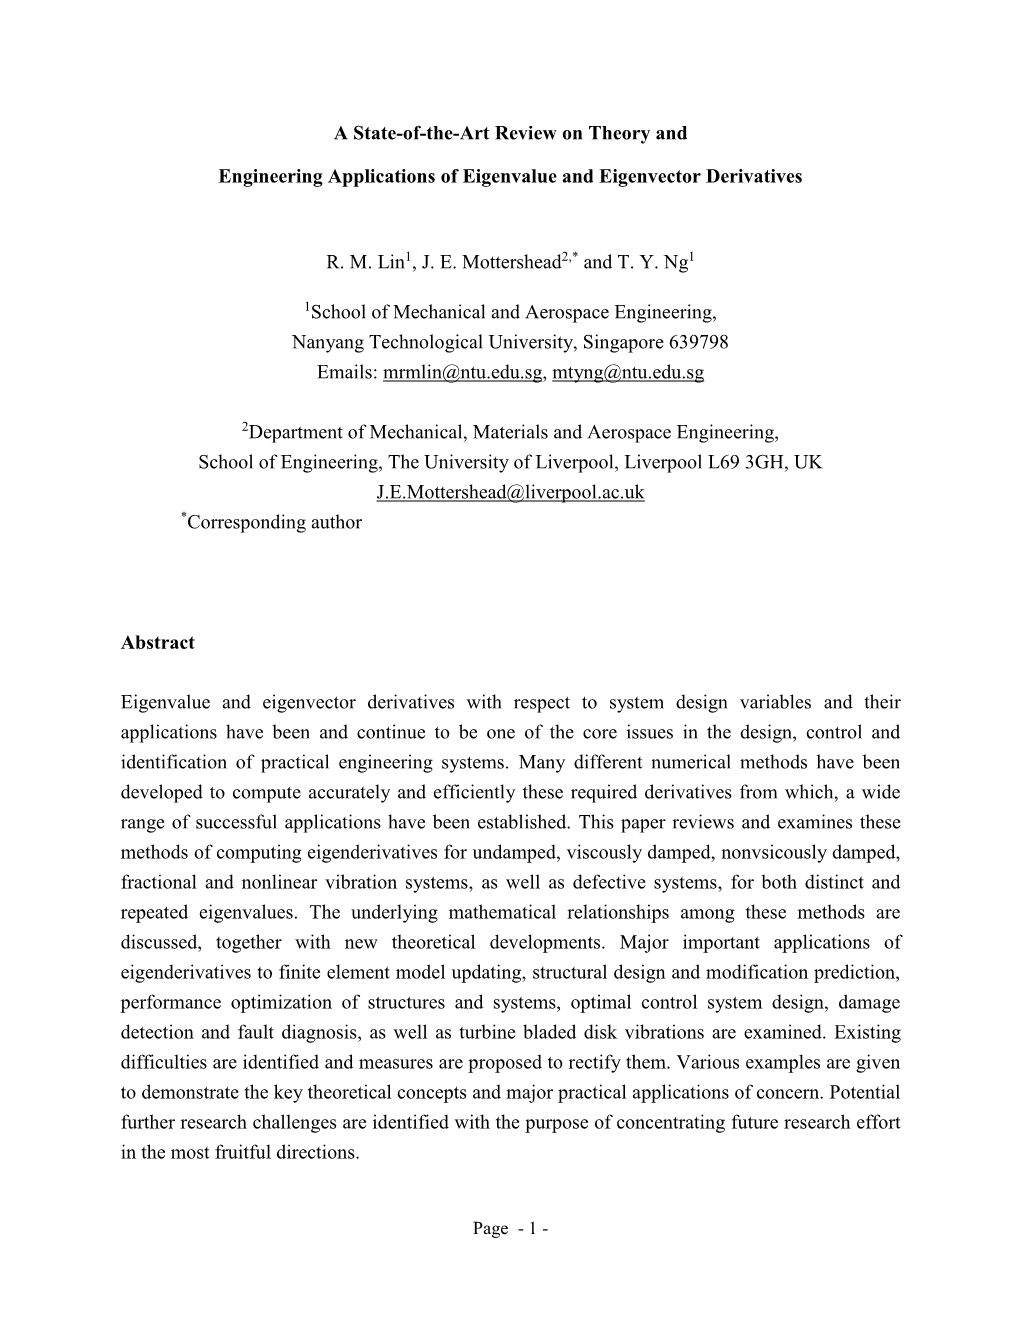 A State-Of-The-Art Review on Theory and Engineering Applications of Eigenvalue and Eigenvector Derivatives R. M. Lin1, J. E